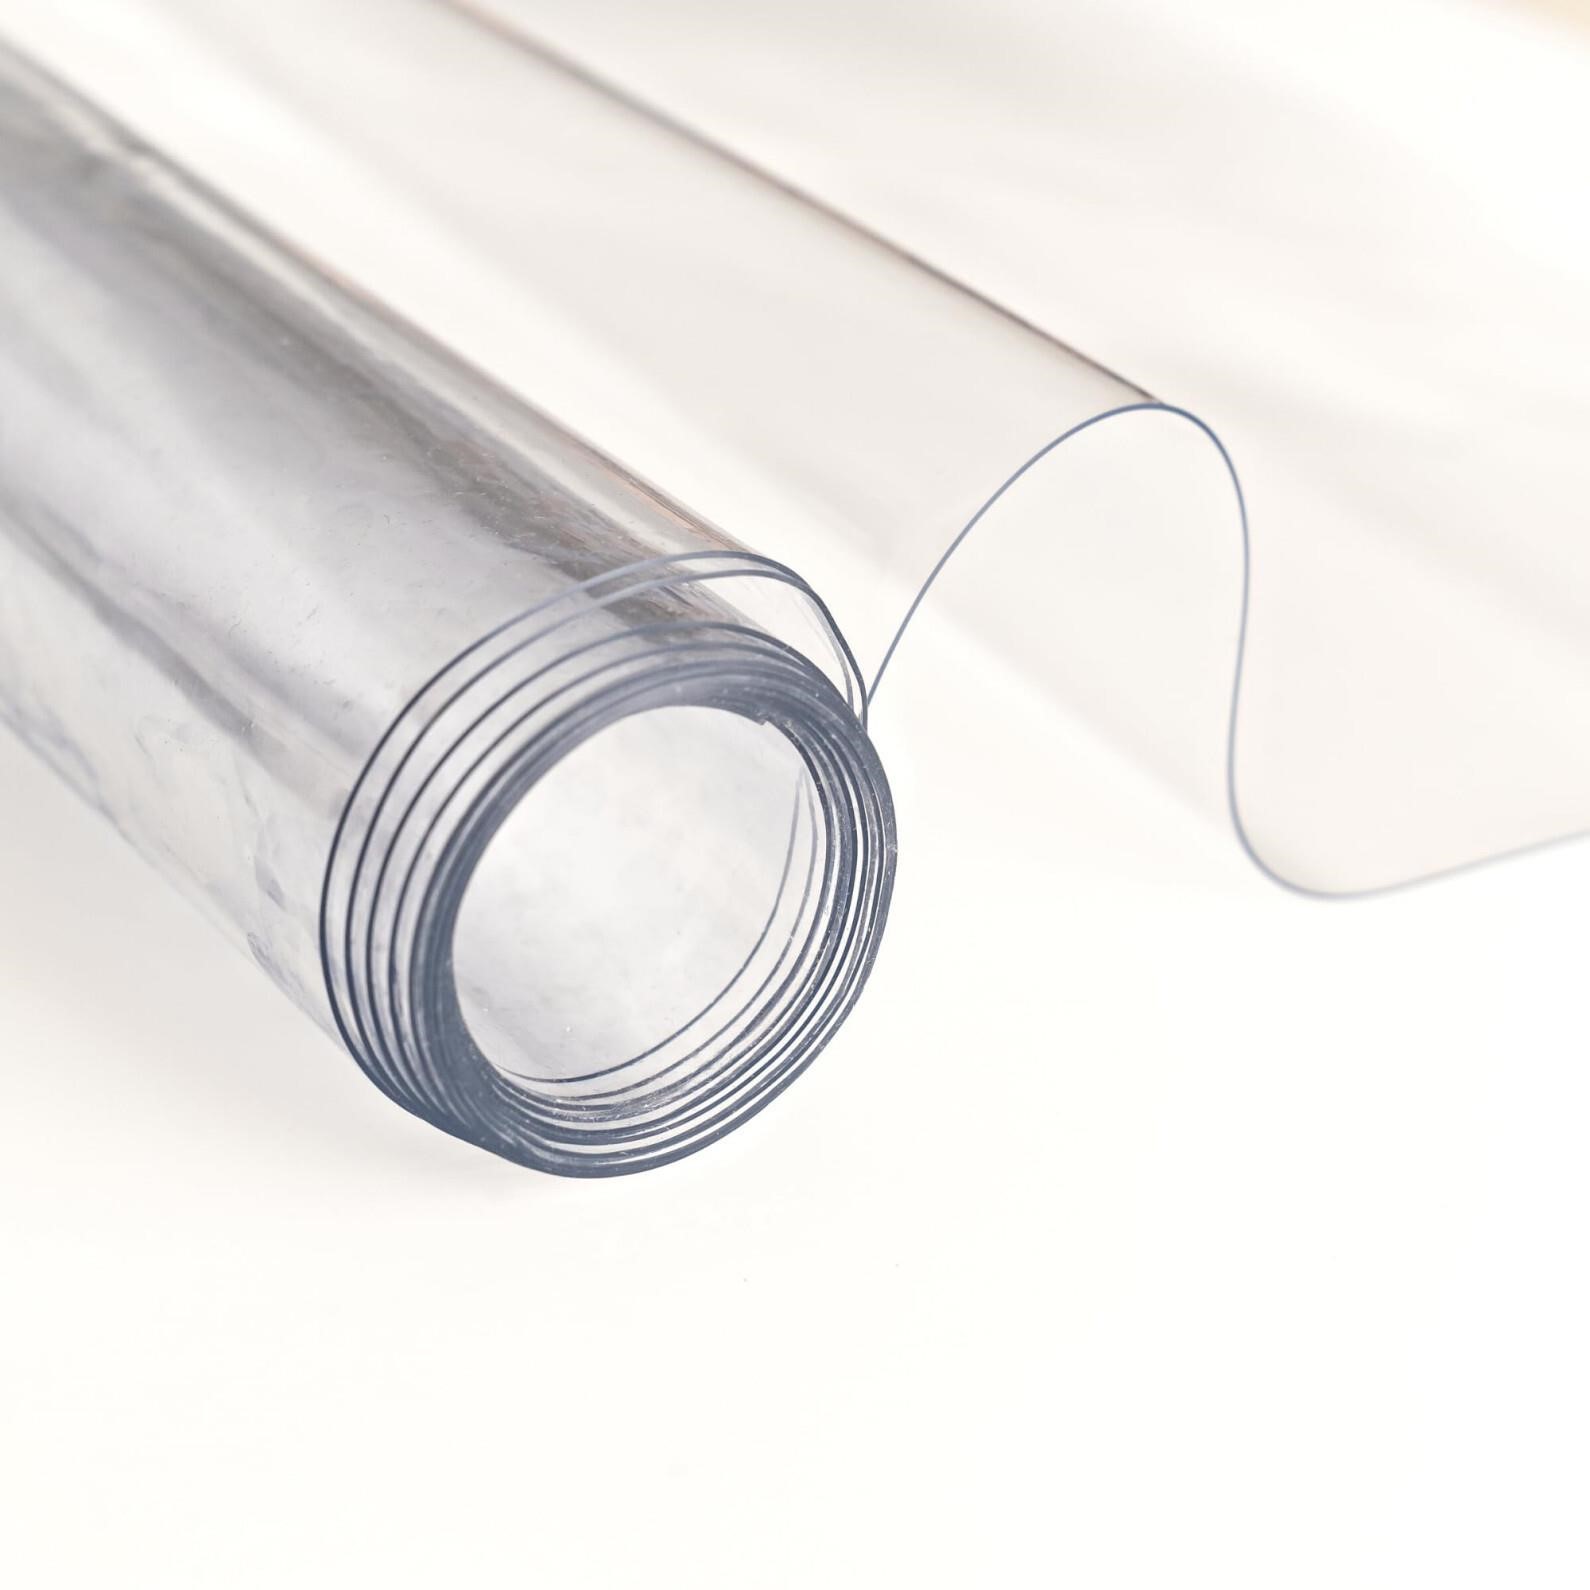 Clear Vinyl Sheeting, 5 Yard Roll of Transparent P